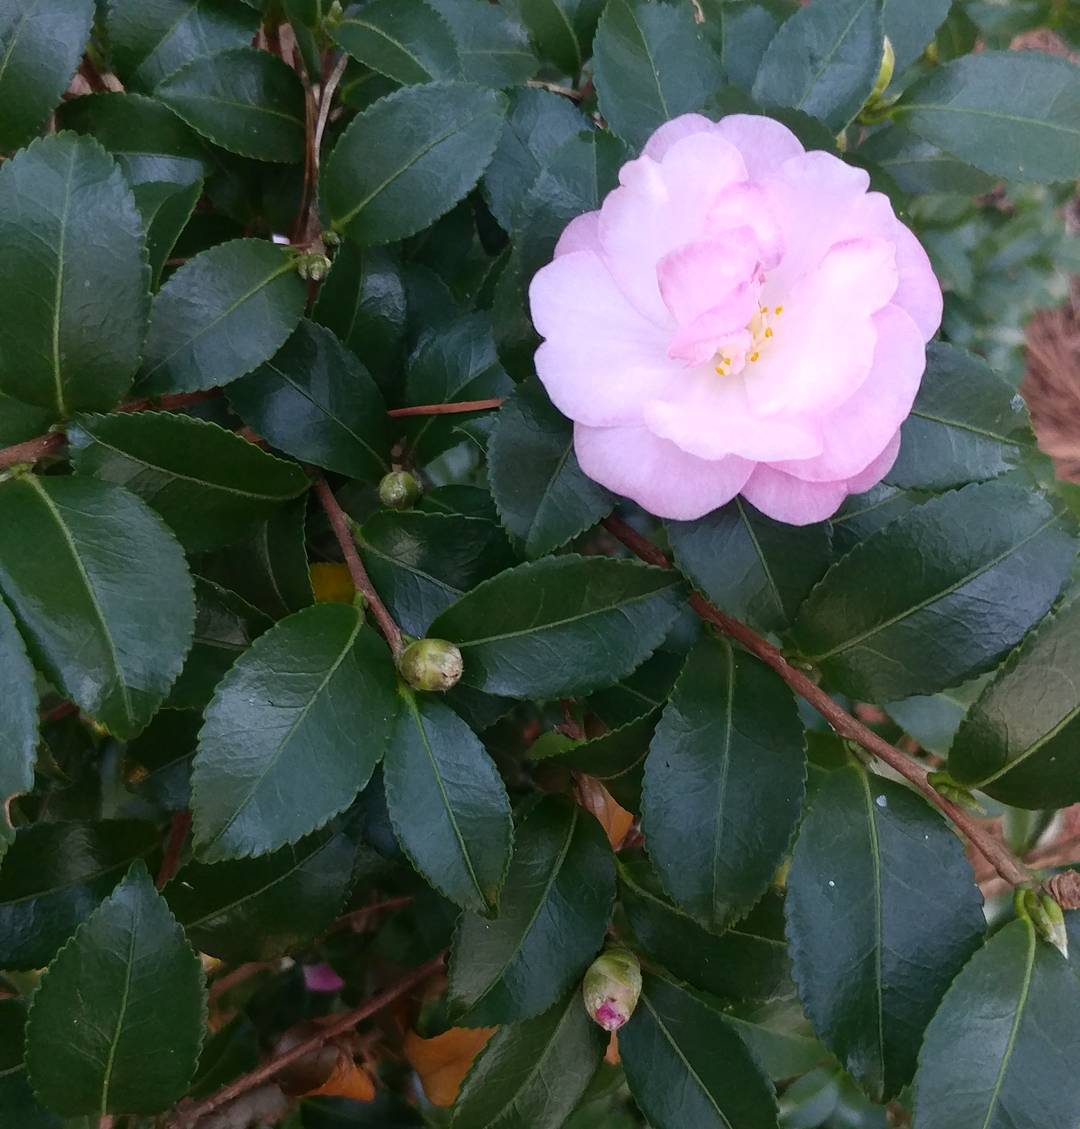 This bush grew a flower! I think that may have been the plan all along. Fancy.